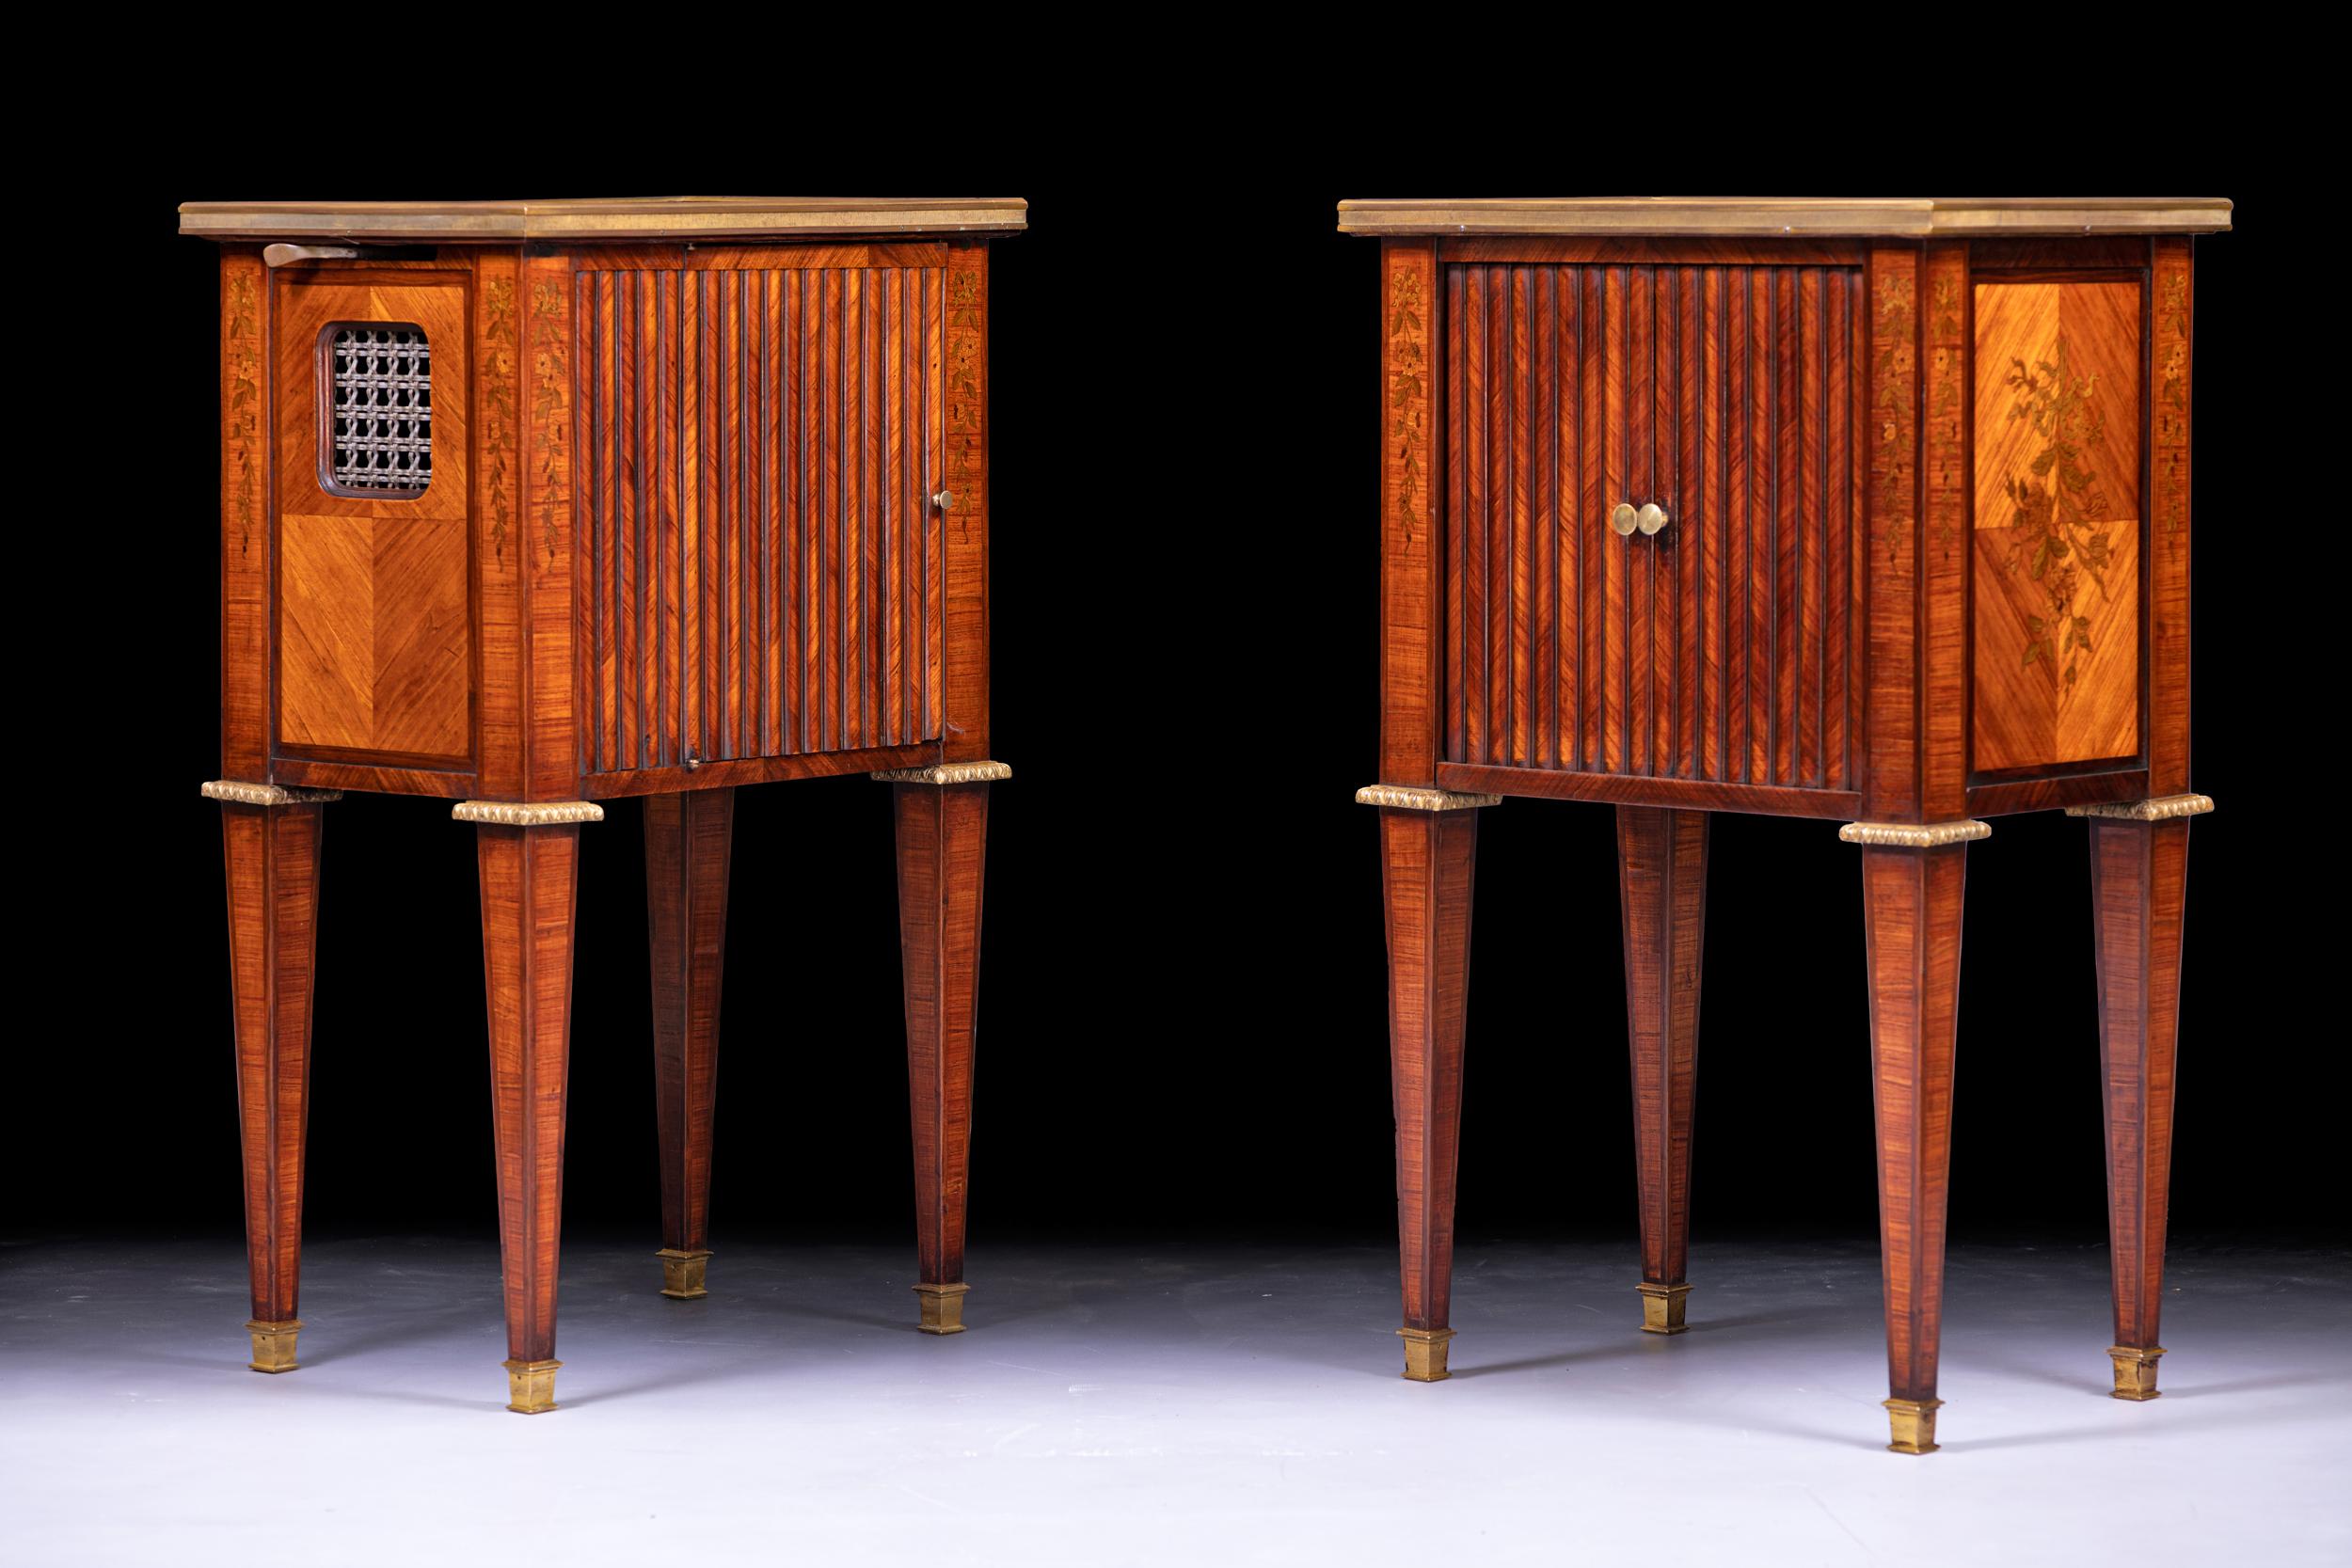 A very fine pair of 19th century French gilt bronze mounted mahogany and satinwood pier cabinets, the rectangular mahogany tops above an acanthus frieze, above a brass banded door with grill and pleated panel opening to a shelved interior, flanked